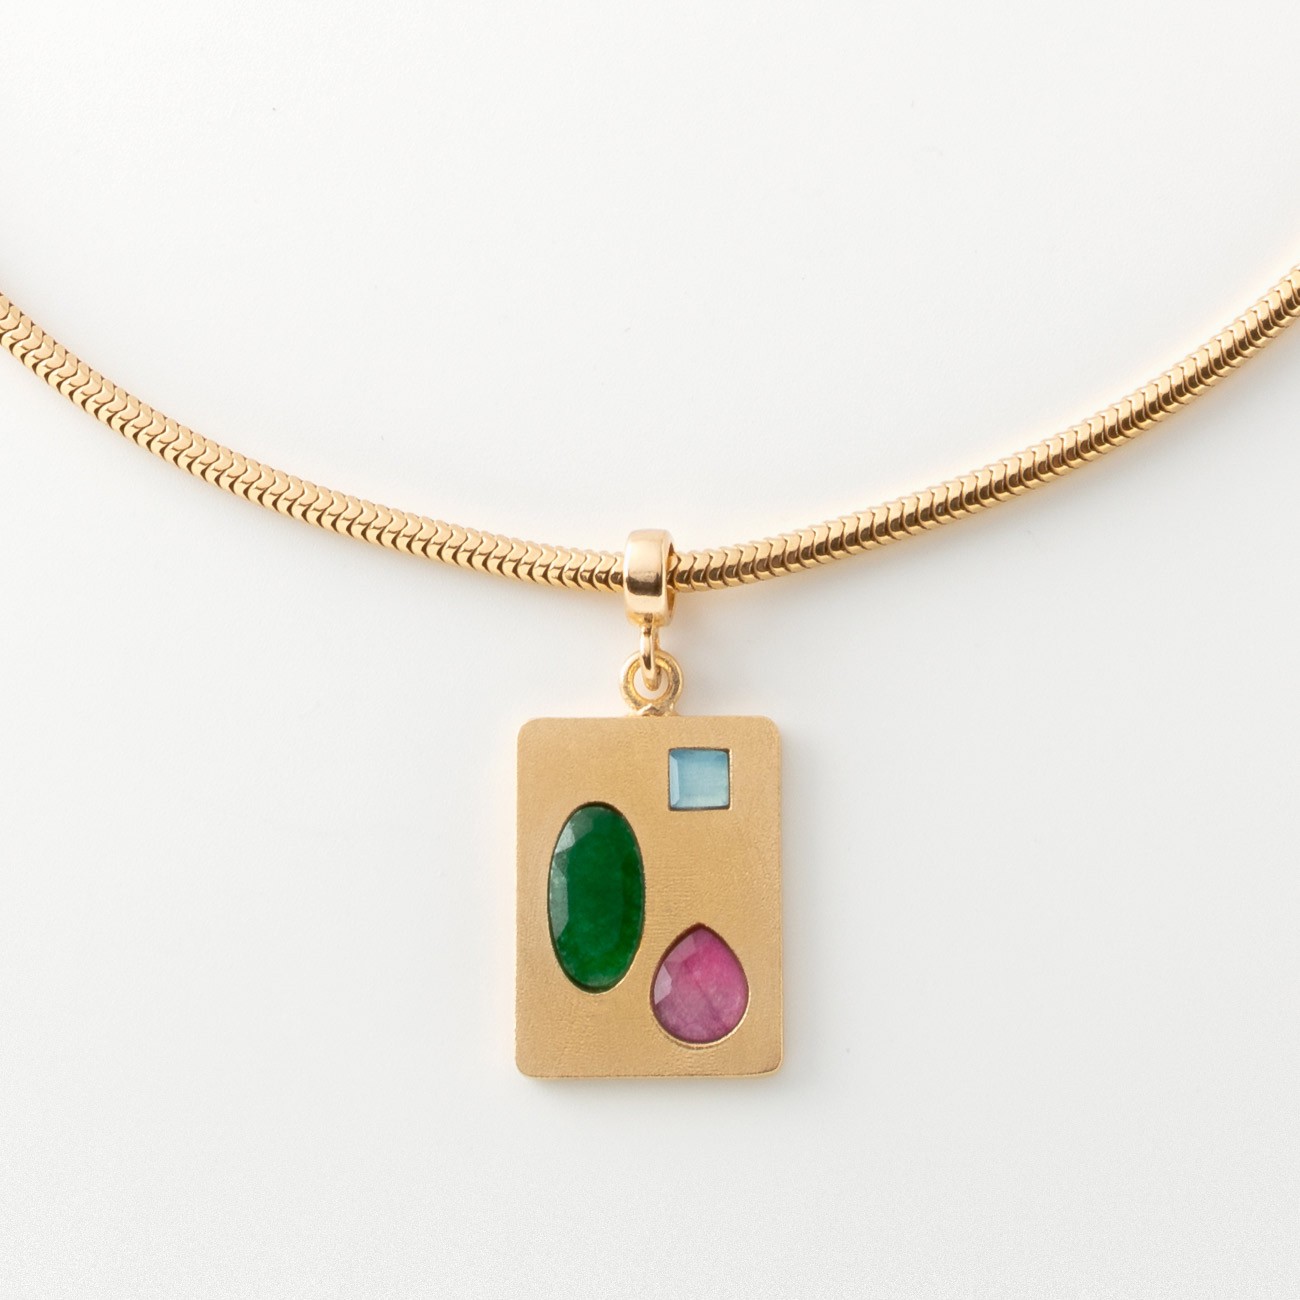 Rectangular pendant necklace with colorful stone